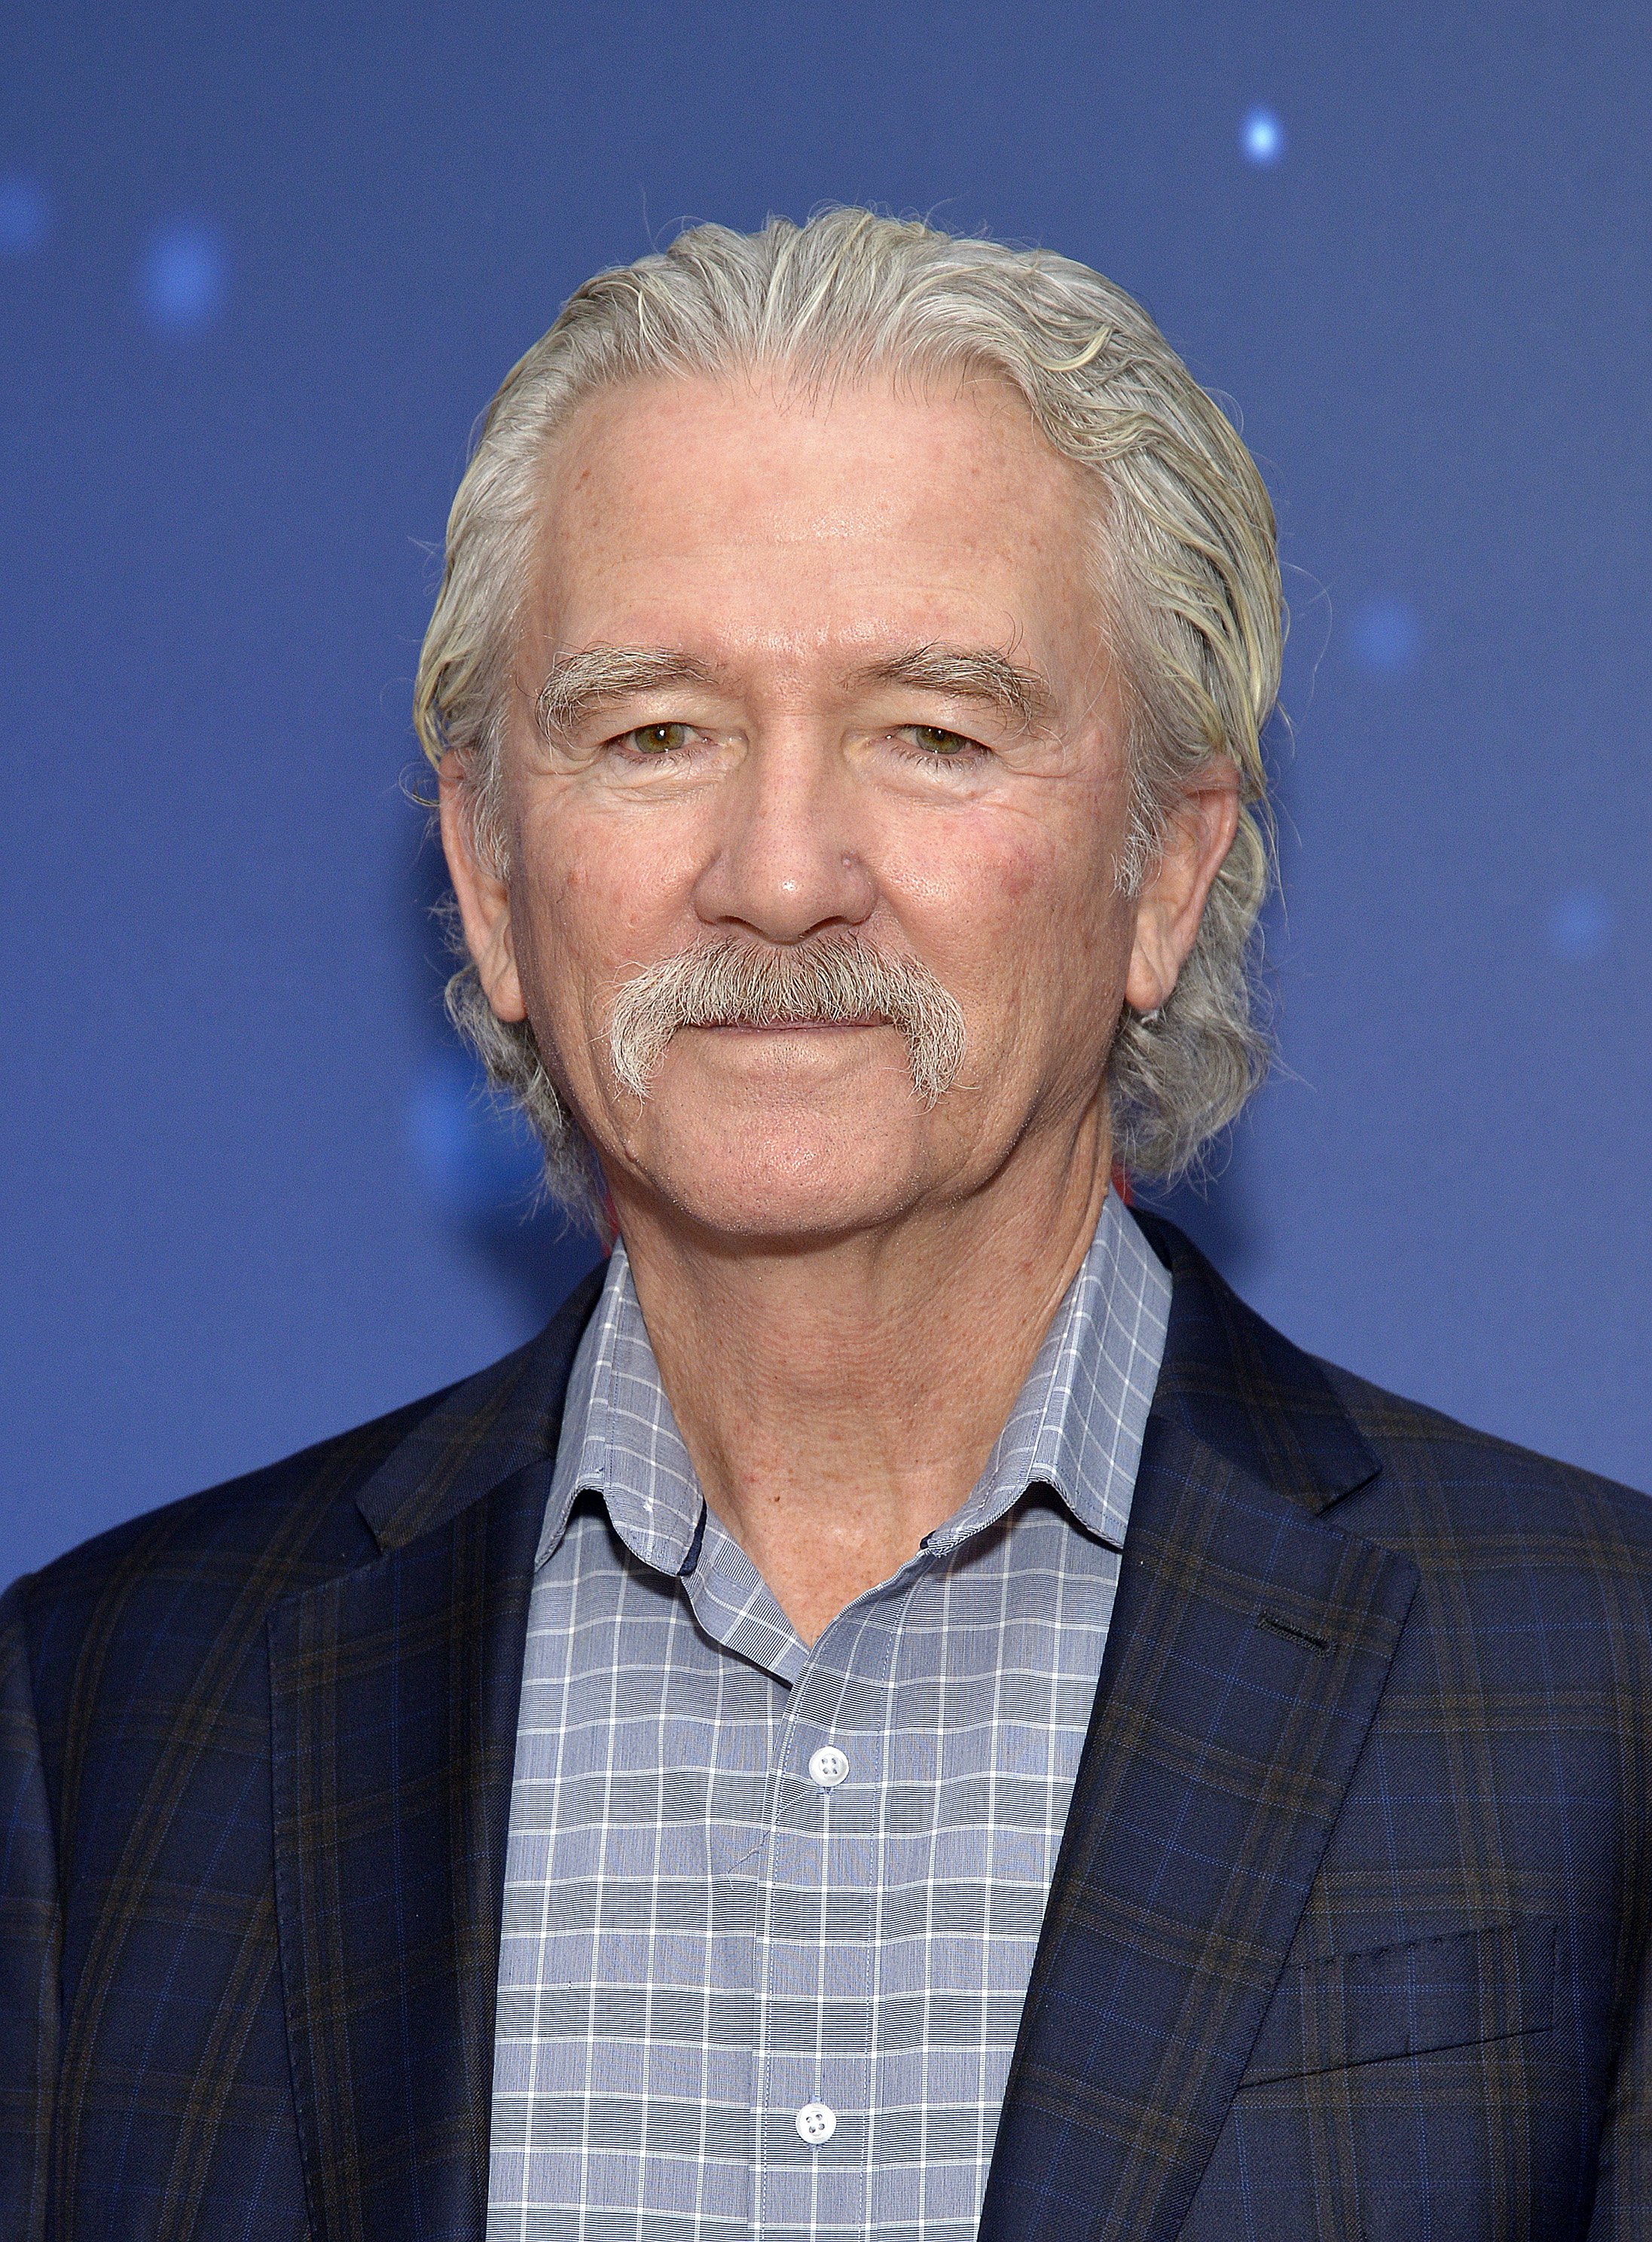 Patrick Duffy attends to say "Santa Claus!" with It's A Wonderful Lifetime Photography Experience at the Glendale Galleria on November 9, 2019, in Glendale, California.  |  Source: Getty Images